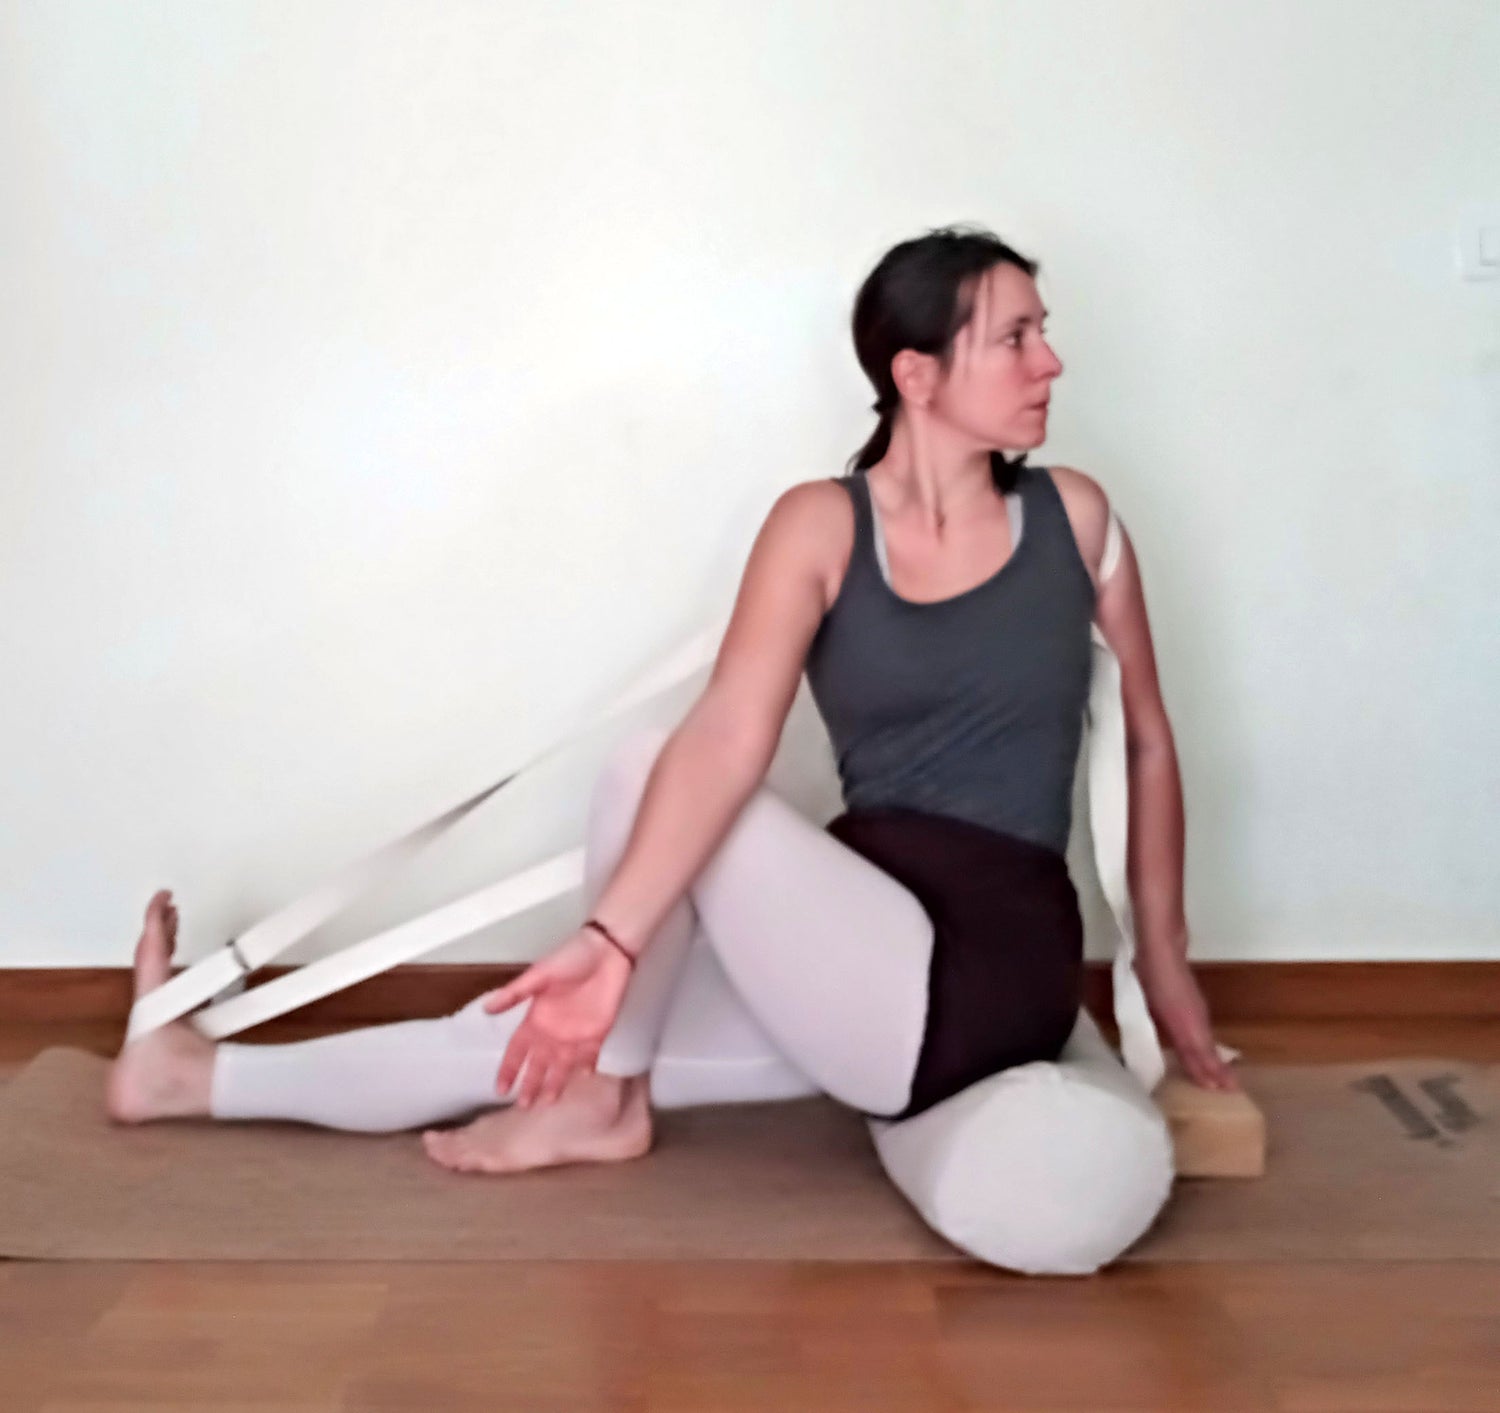 Buy Organic Cotton Yoga Bolsters - Filled with Buckwheat or Spelt